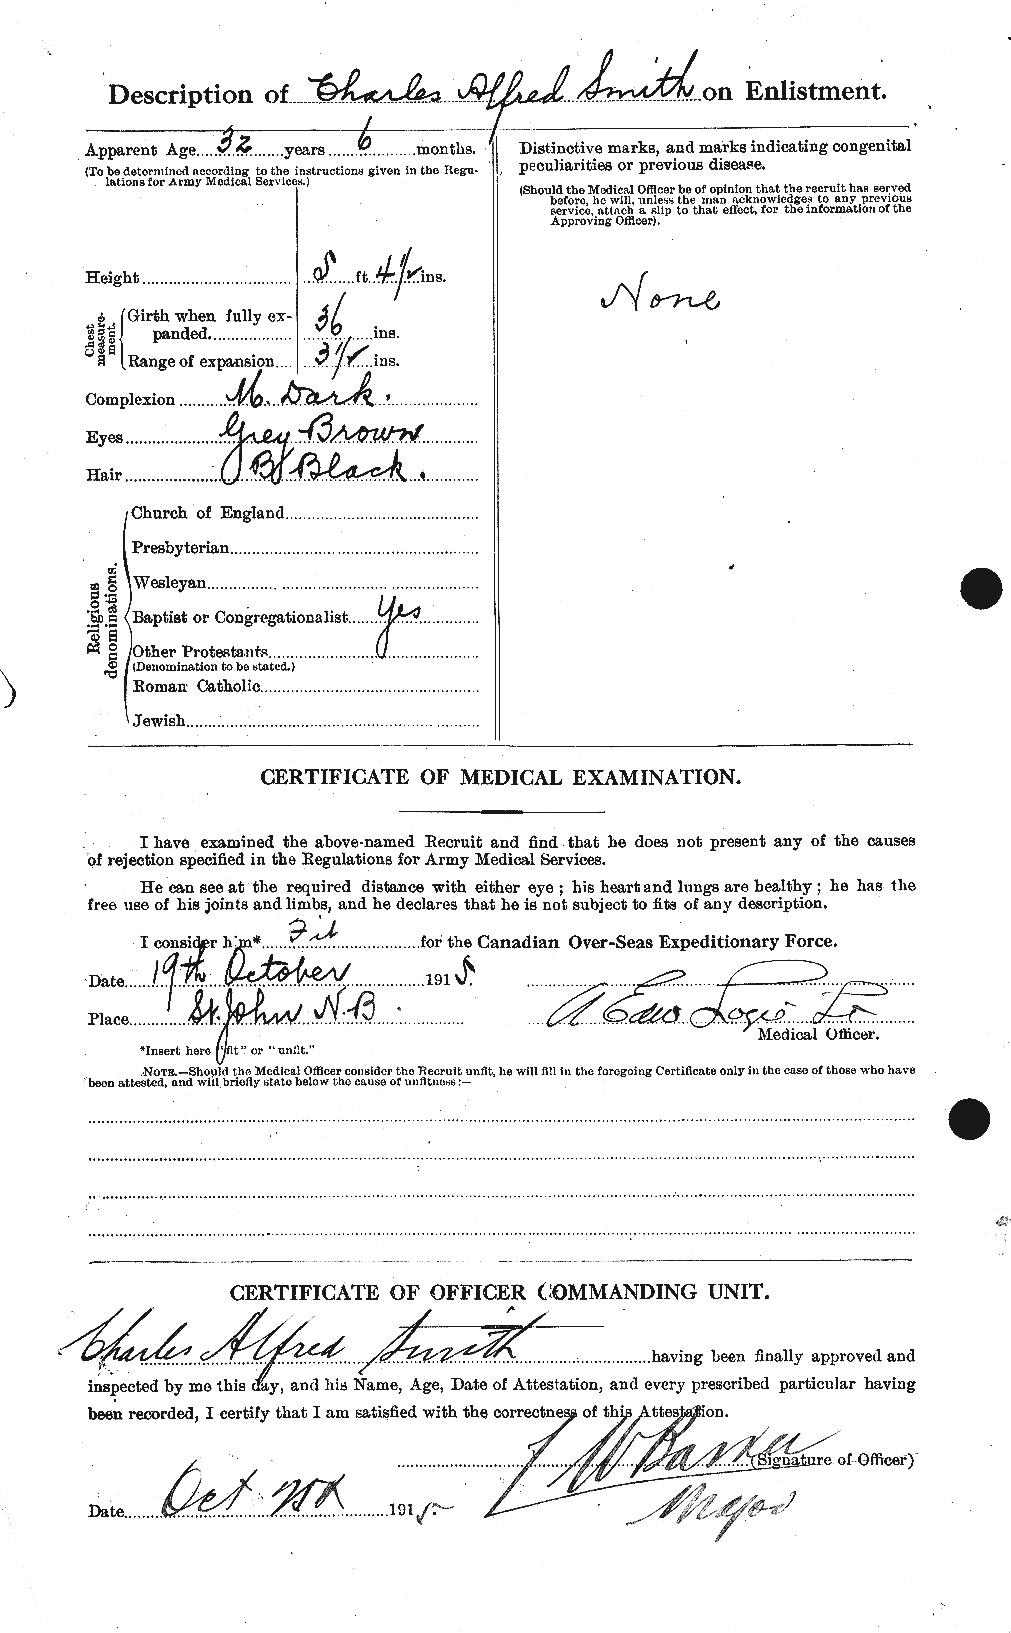 Personnel Records of the First World War - CEF 100098b